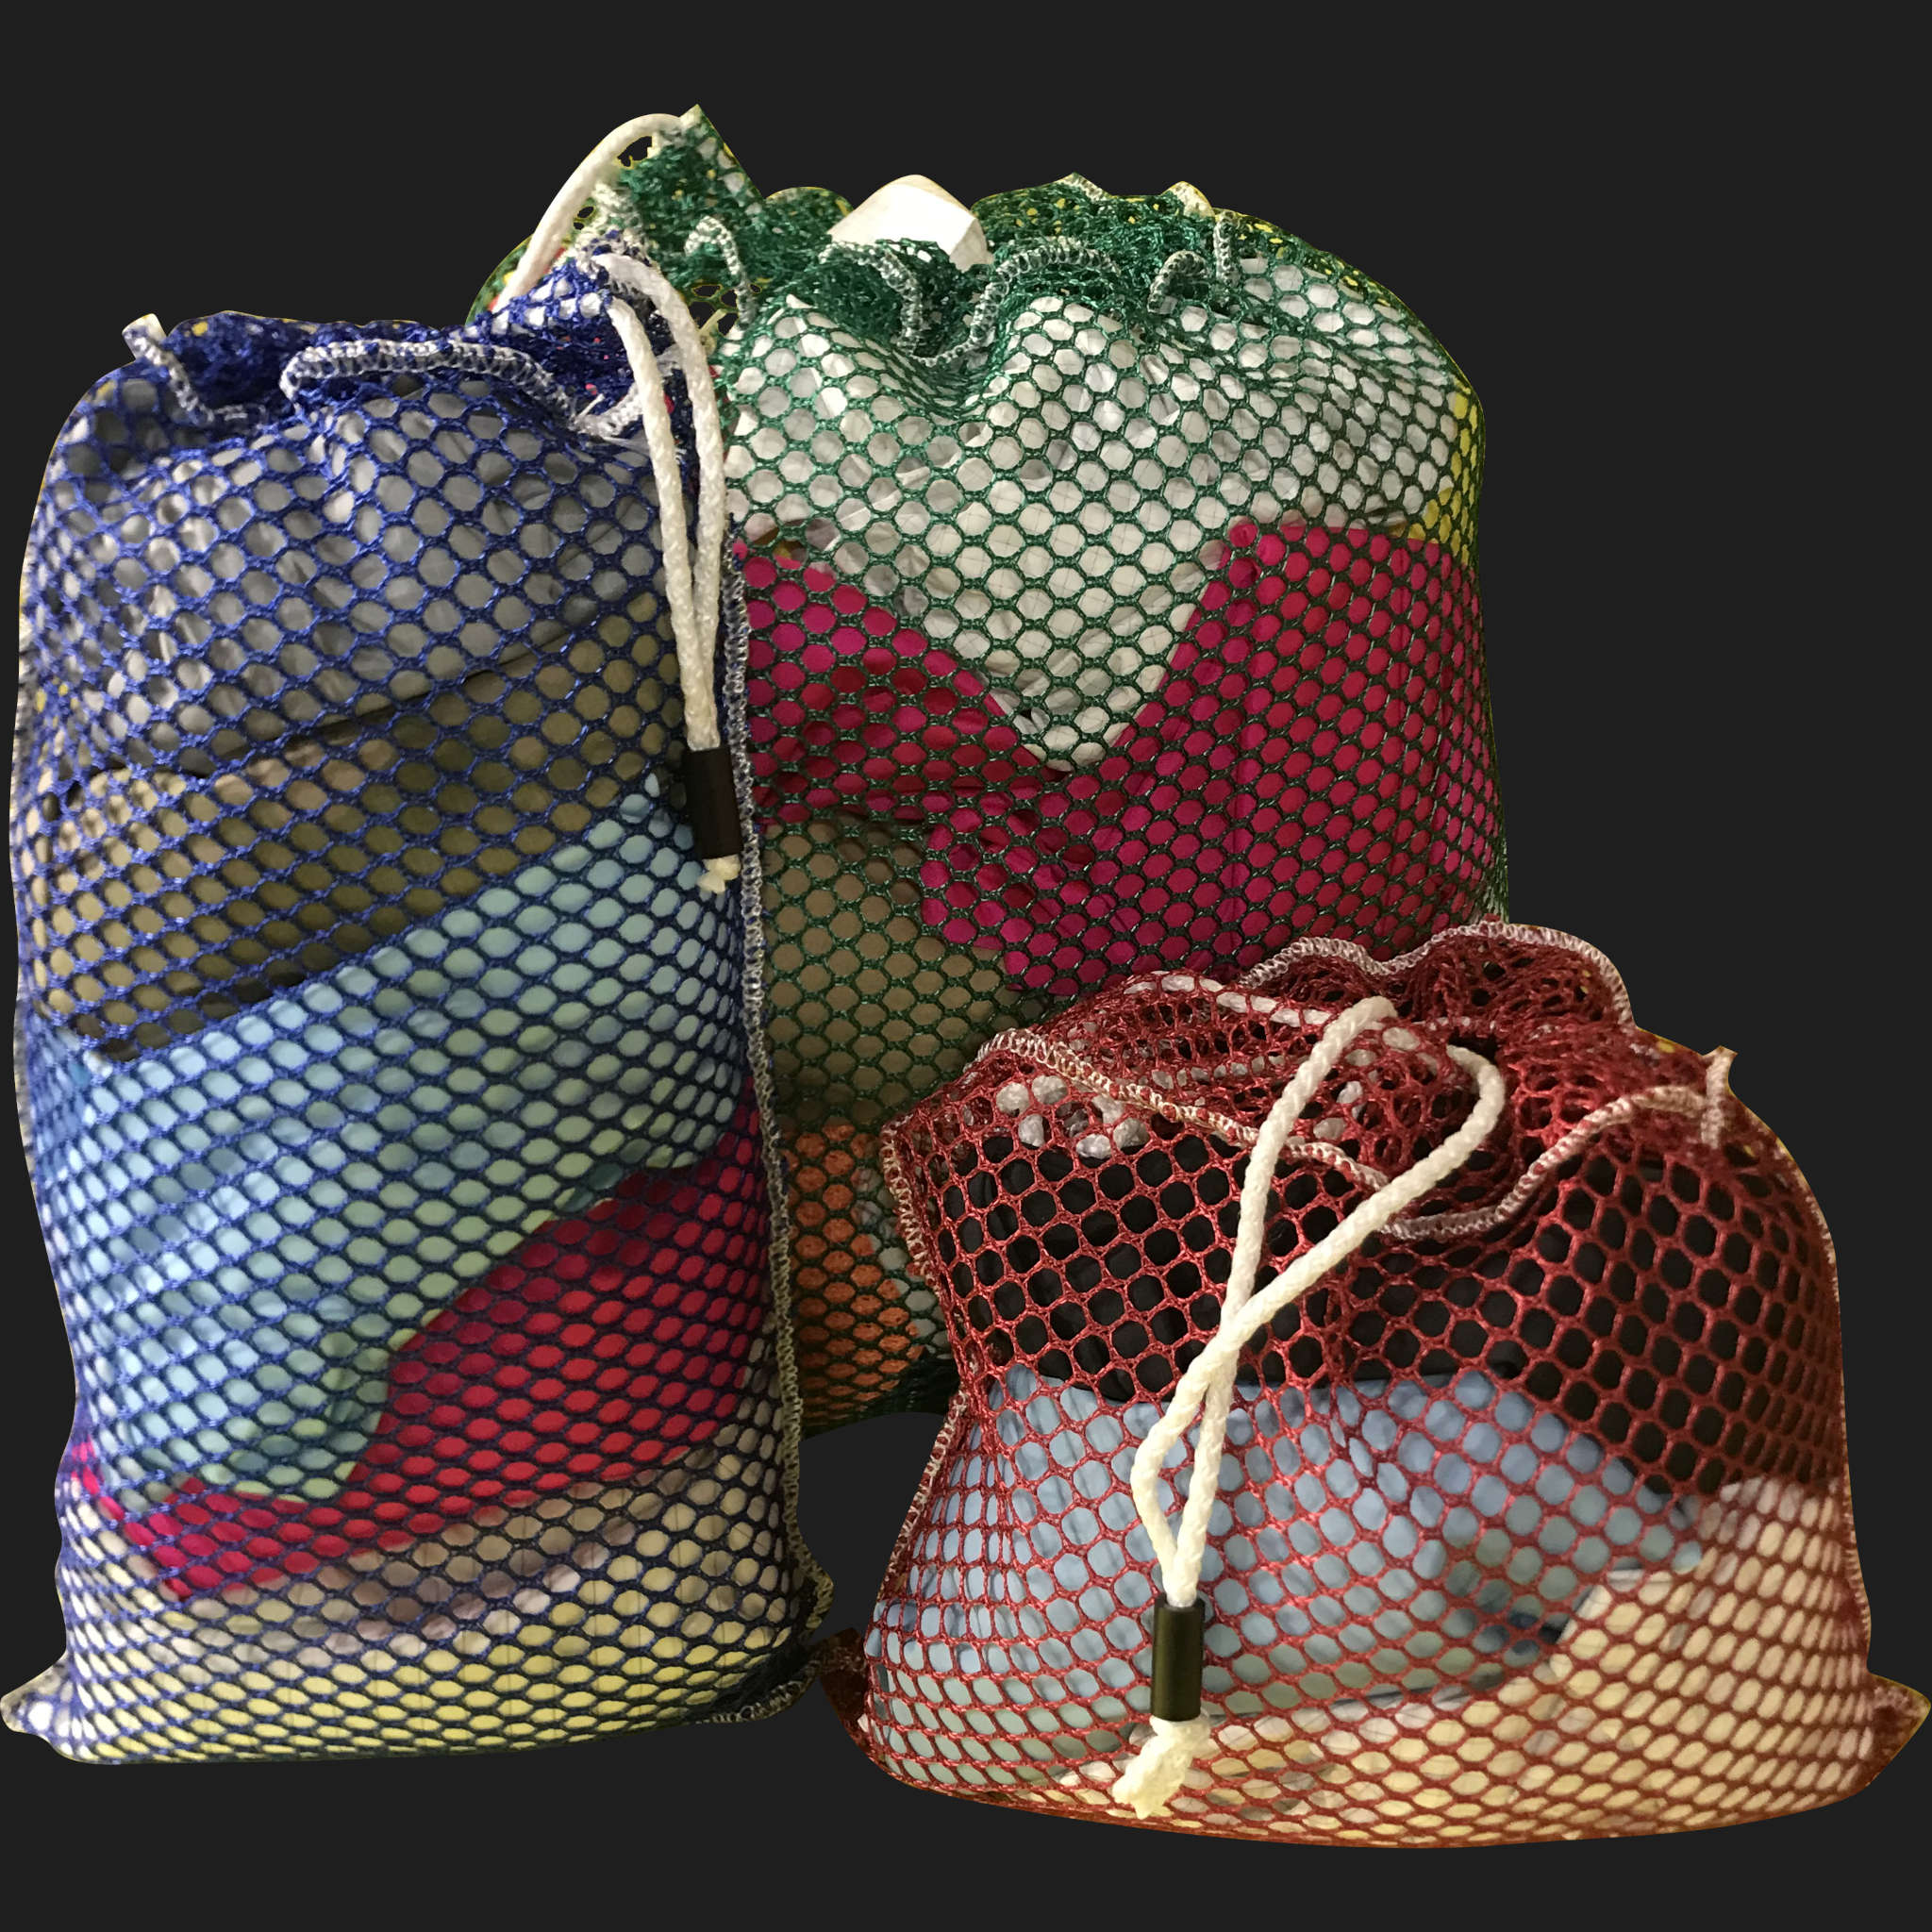 26" x 36" Customized Mesh-Net-Laundry Bags Heavy Duty with Cord and barrellock closure